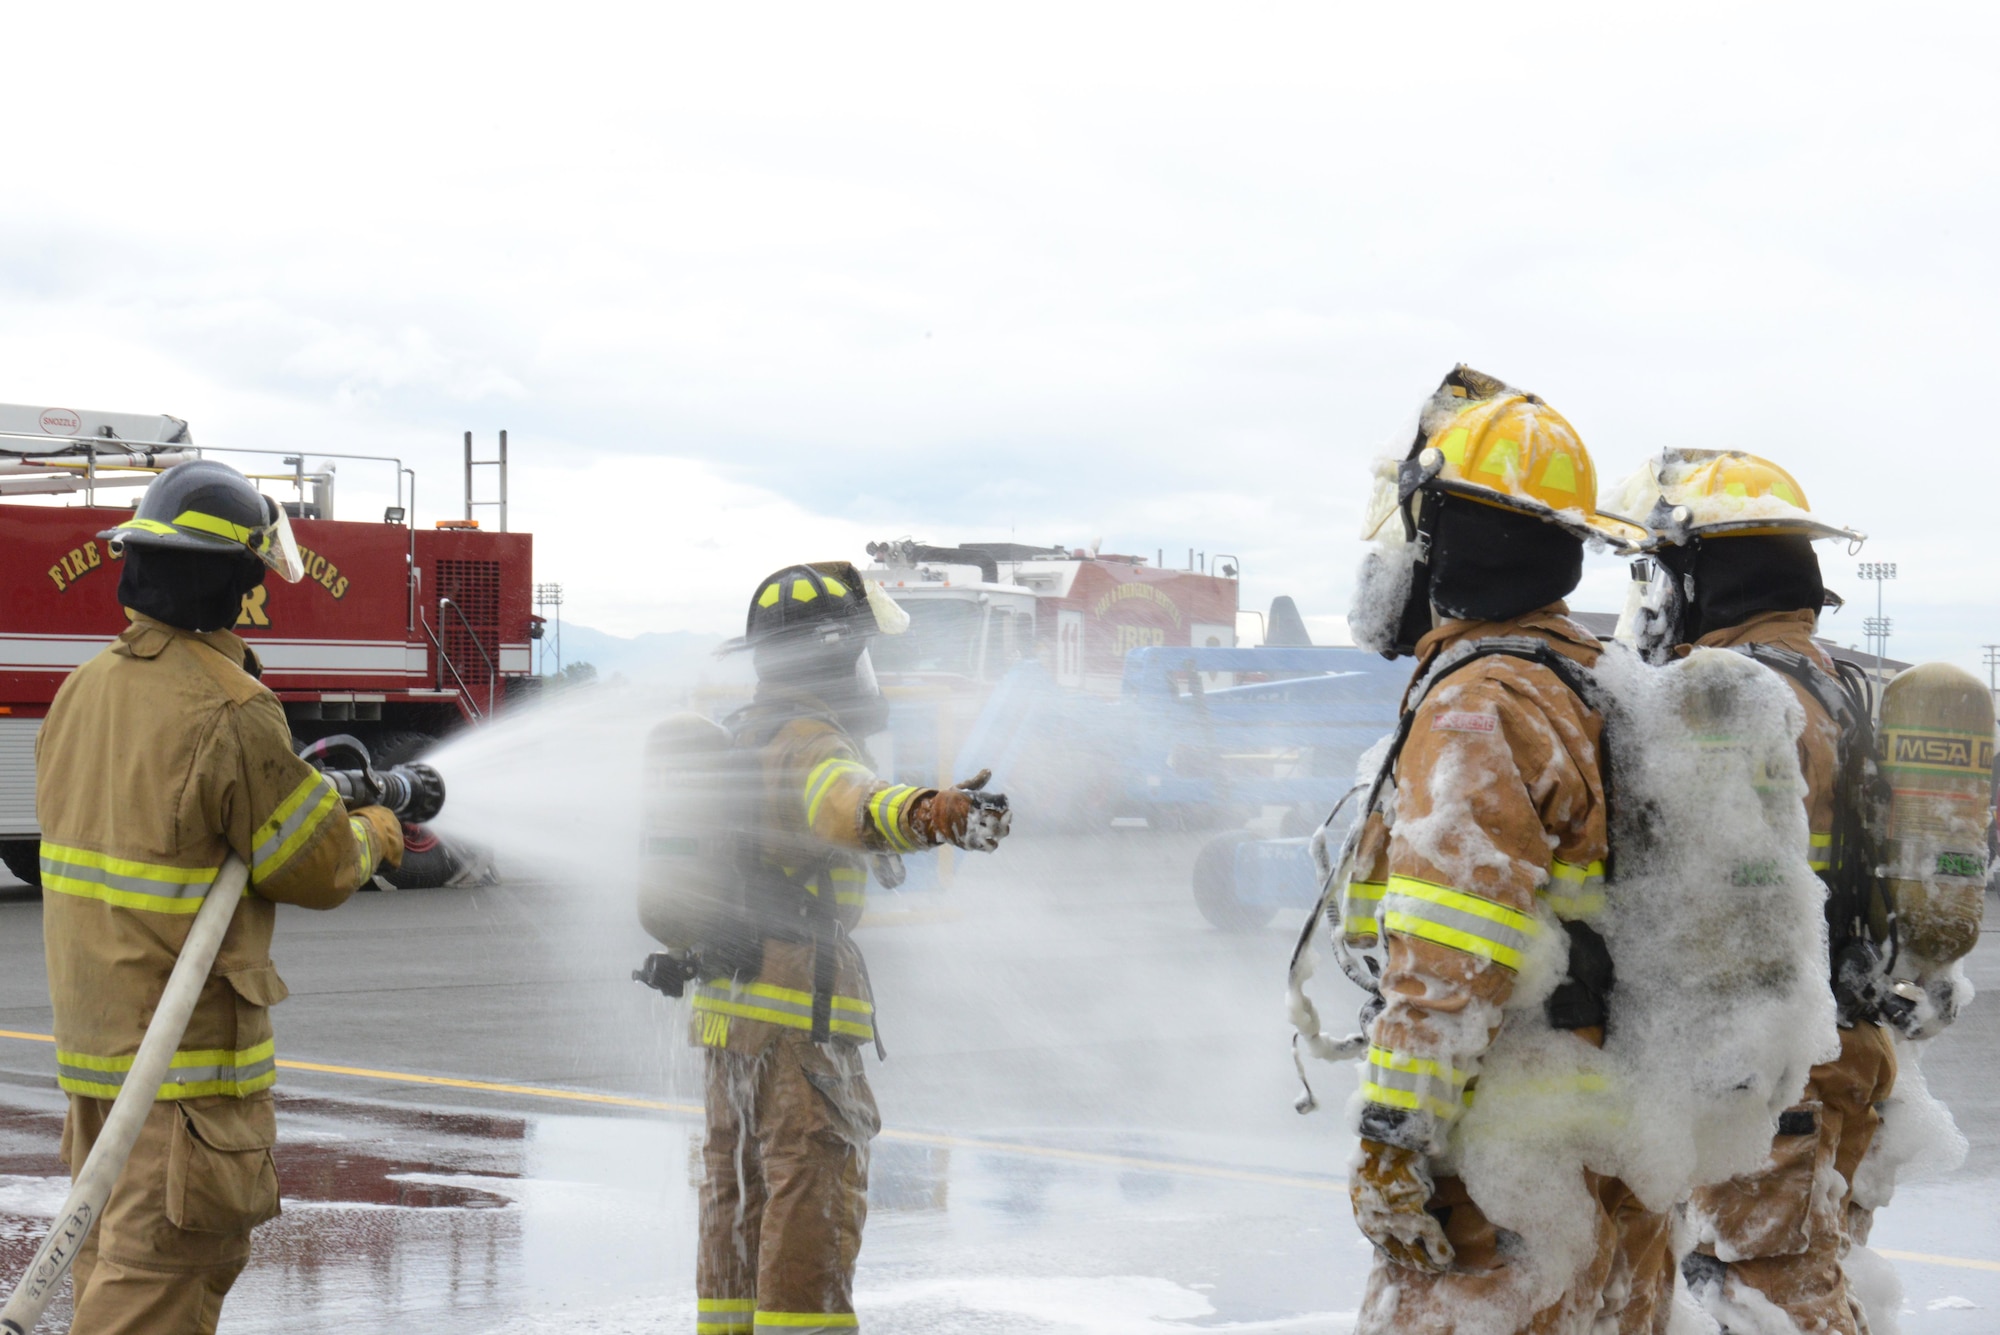 Firefighters assigned to the 673d Civil Engineer Squadron train during the high-expansion foam test at Hangar 18 on Joint Base Elmendorf-Richardson, Alaska, Aug. 31, 2017. The firefighters were a part of the foam test to practice and train for rescue operations. (U.S. Air Force photo by Airman 1st Class Caitlin Russell)